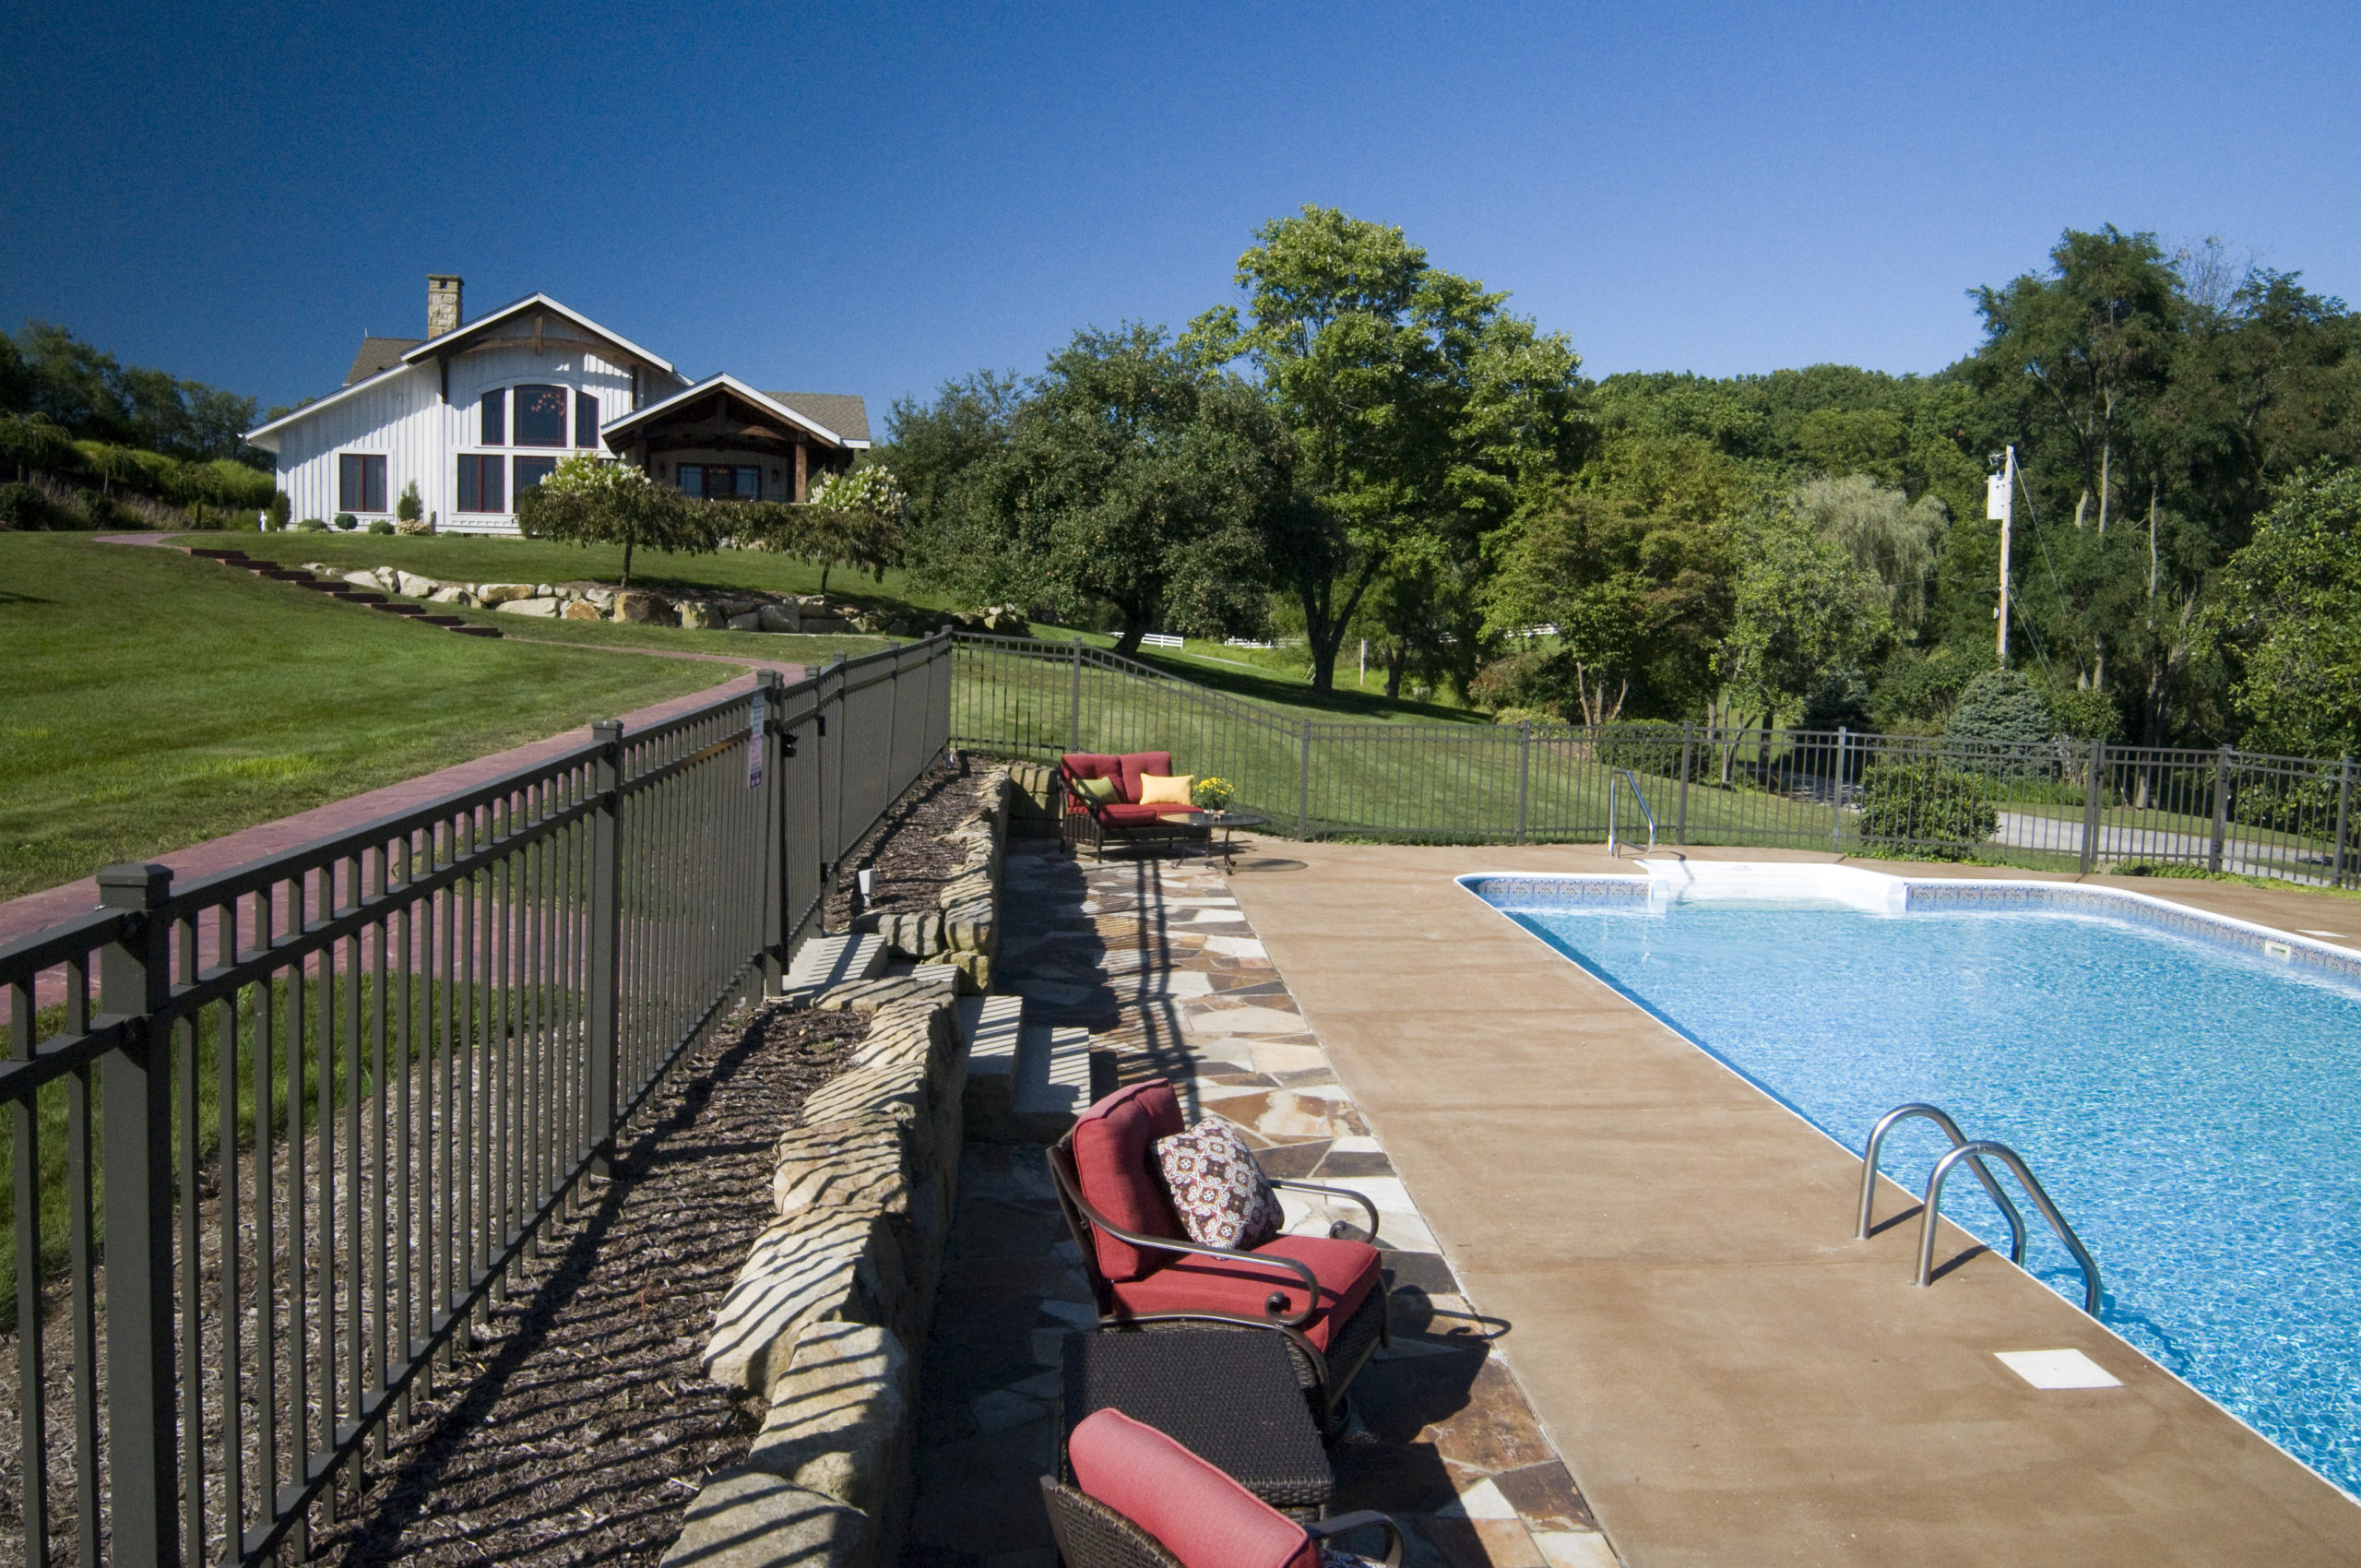 Pool overlooking the main lodge at Silvermist